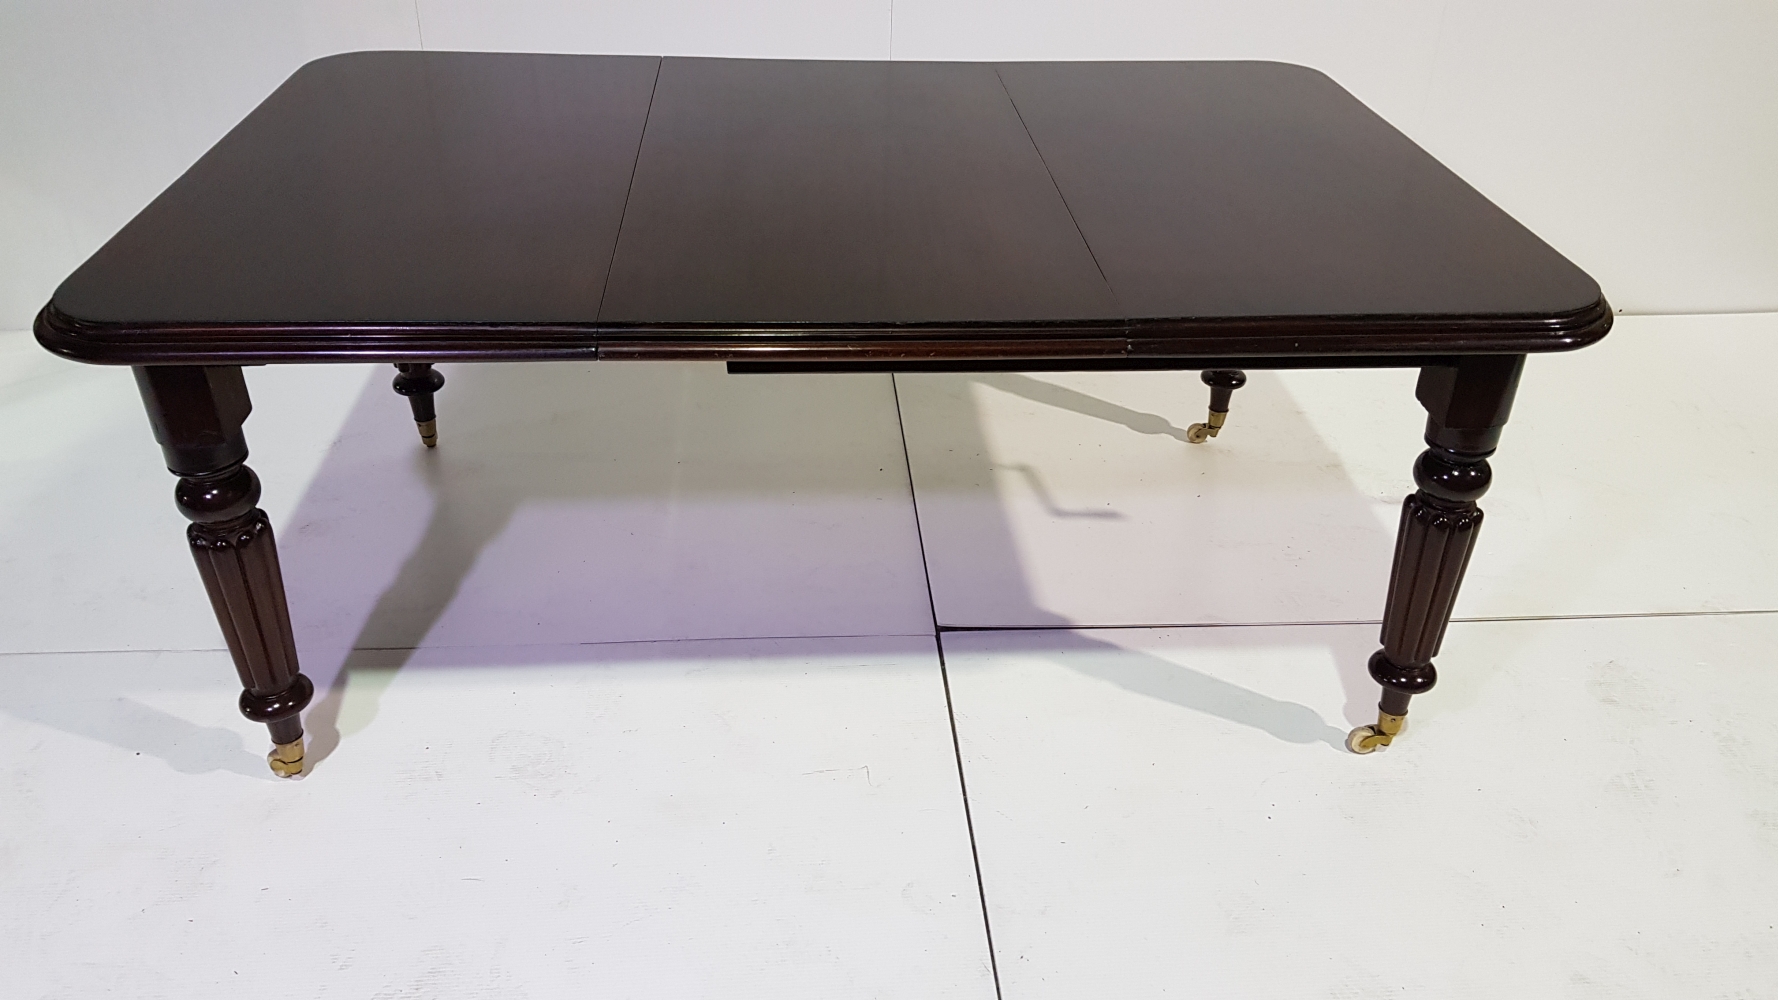 A GOOD QUALITY SINGLE LEAF 19TH CENTURY MAHOGANY DINING TABLE, in mint condition, with leaf, - Image 2 of 5